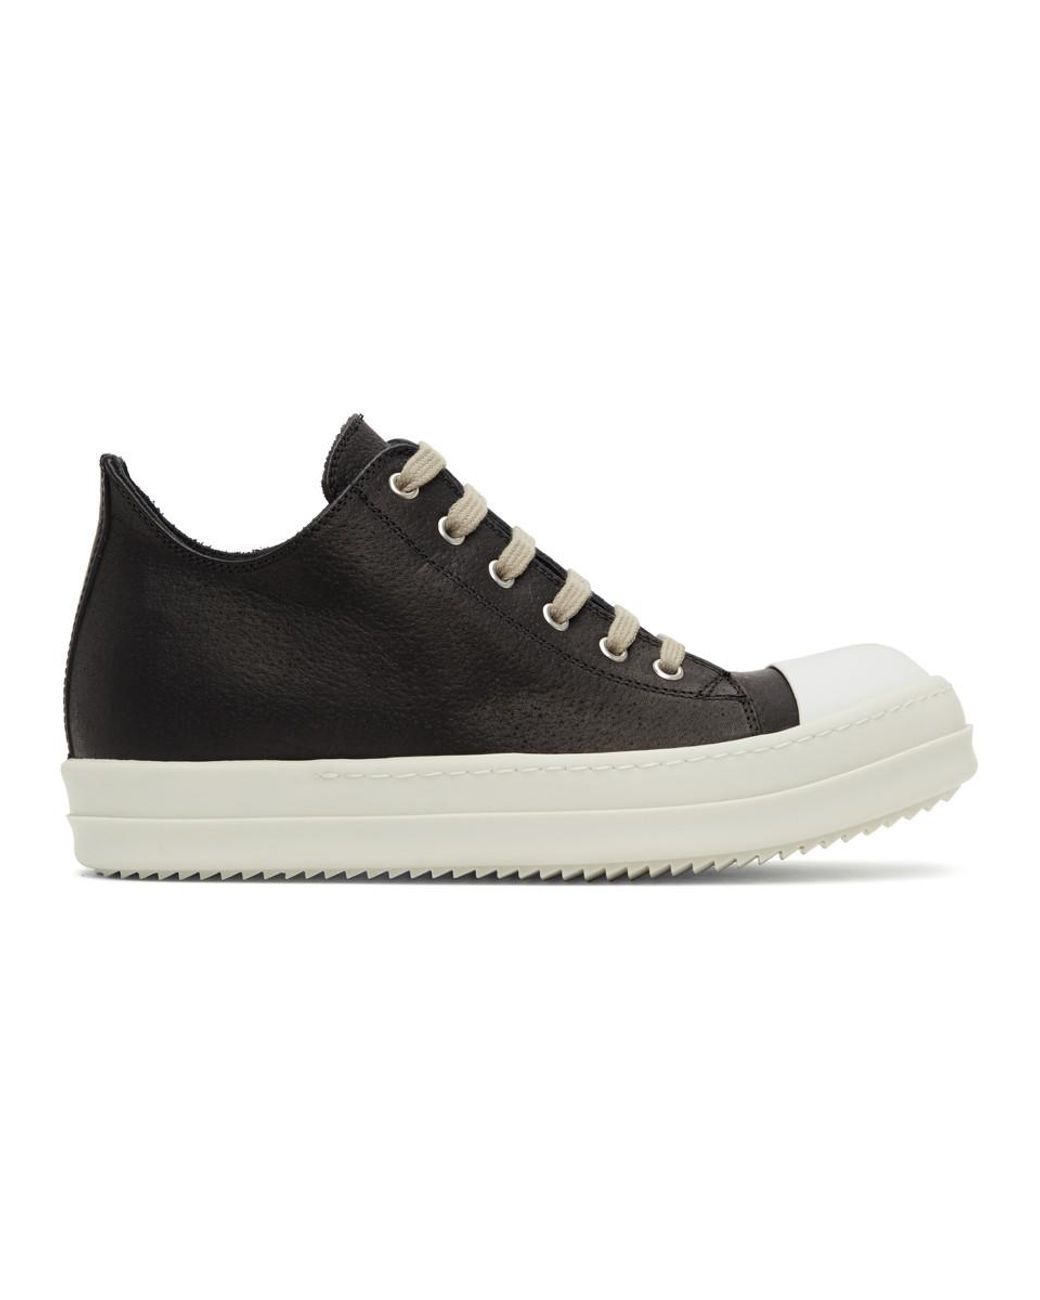 Rick Owens Leather Black Low Sneakers for Men - Lyst